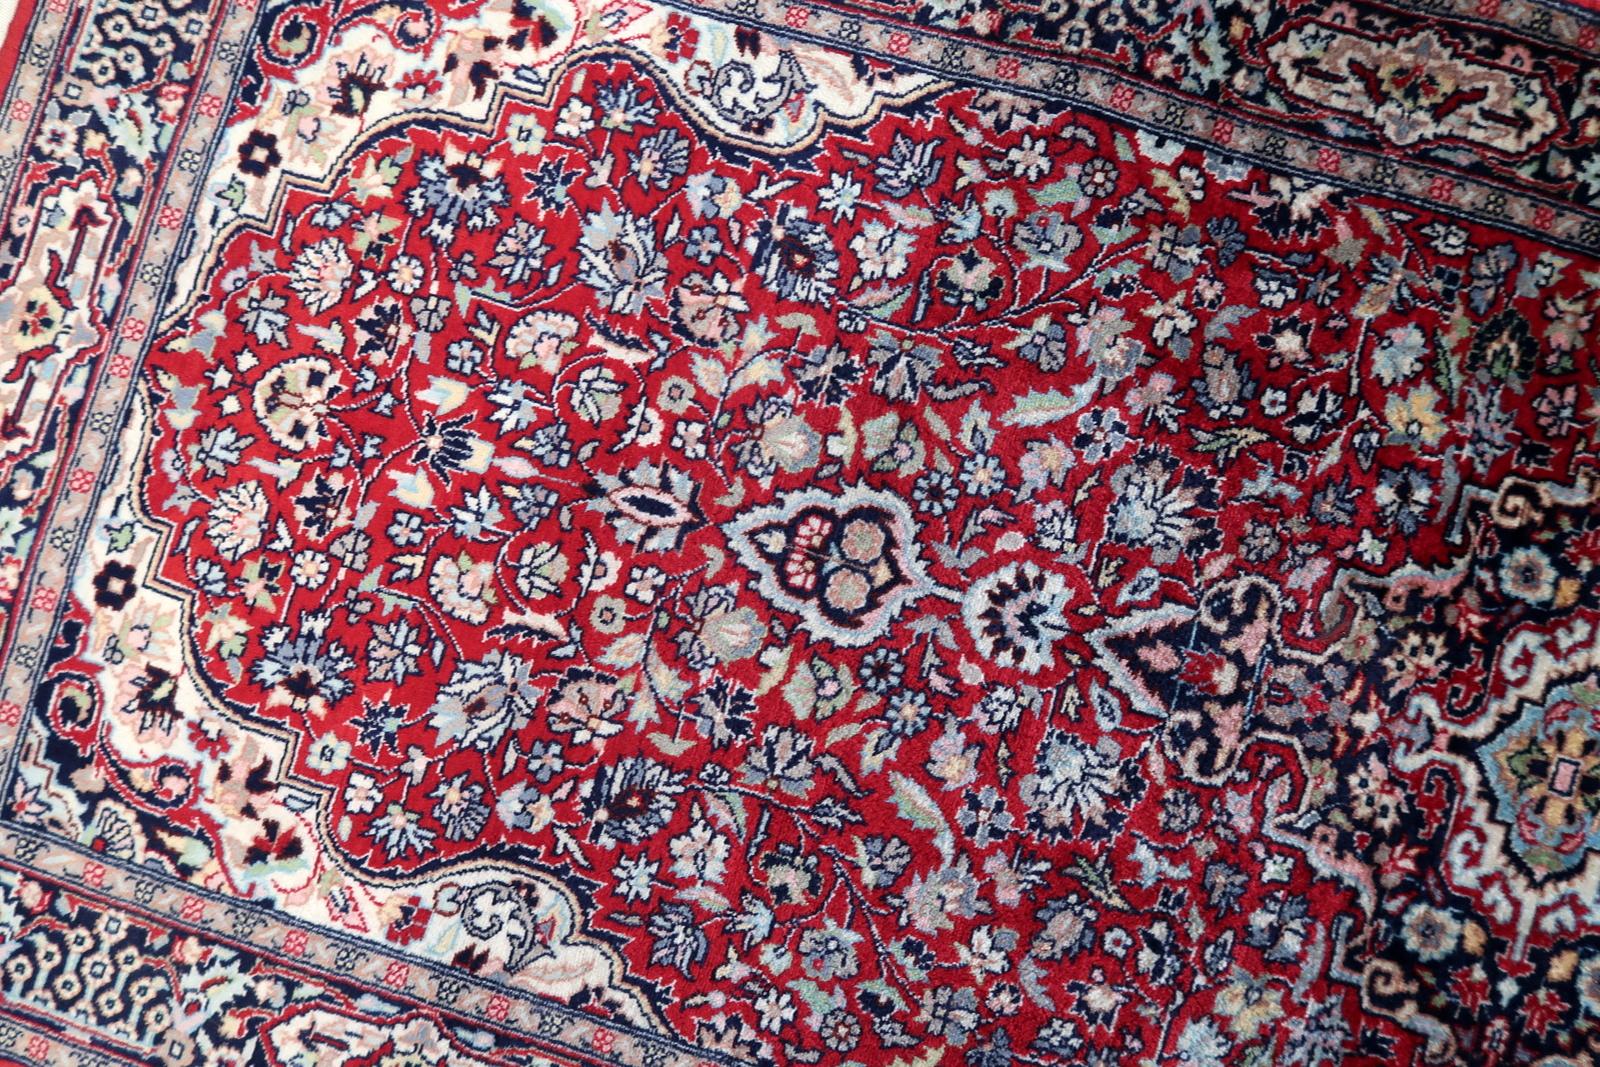 Mid-20th Century Handmade Vintage Persian Style Kashan Runner Rug 2.4' x 5.8, 1960s - 1C1107 For Sale